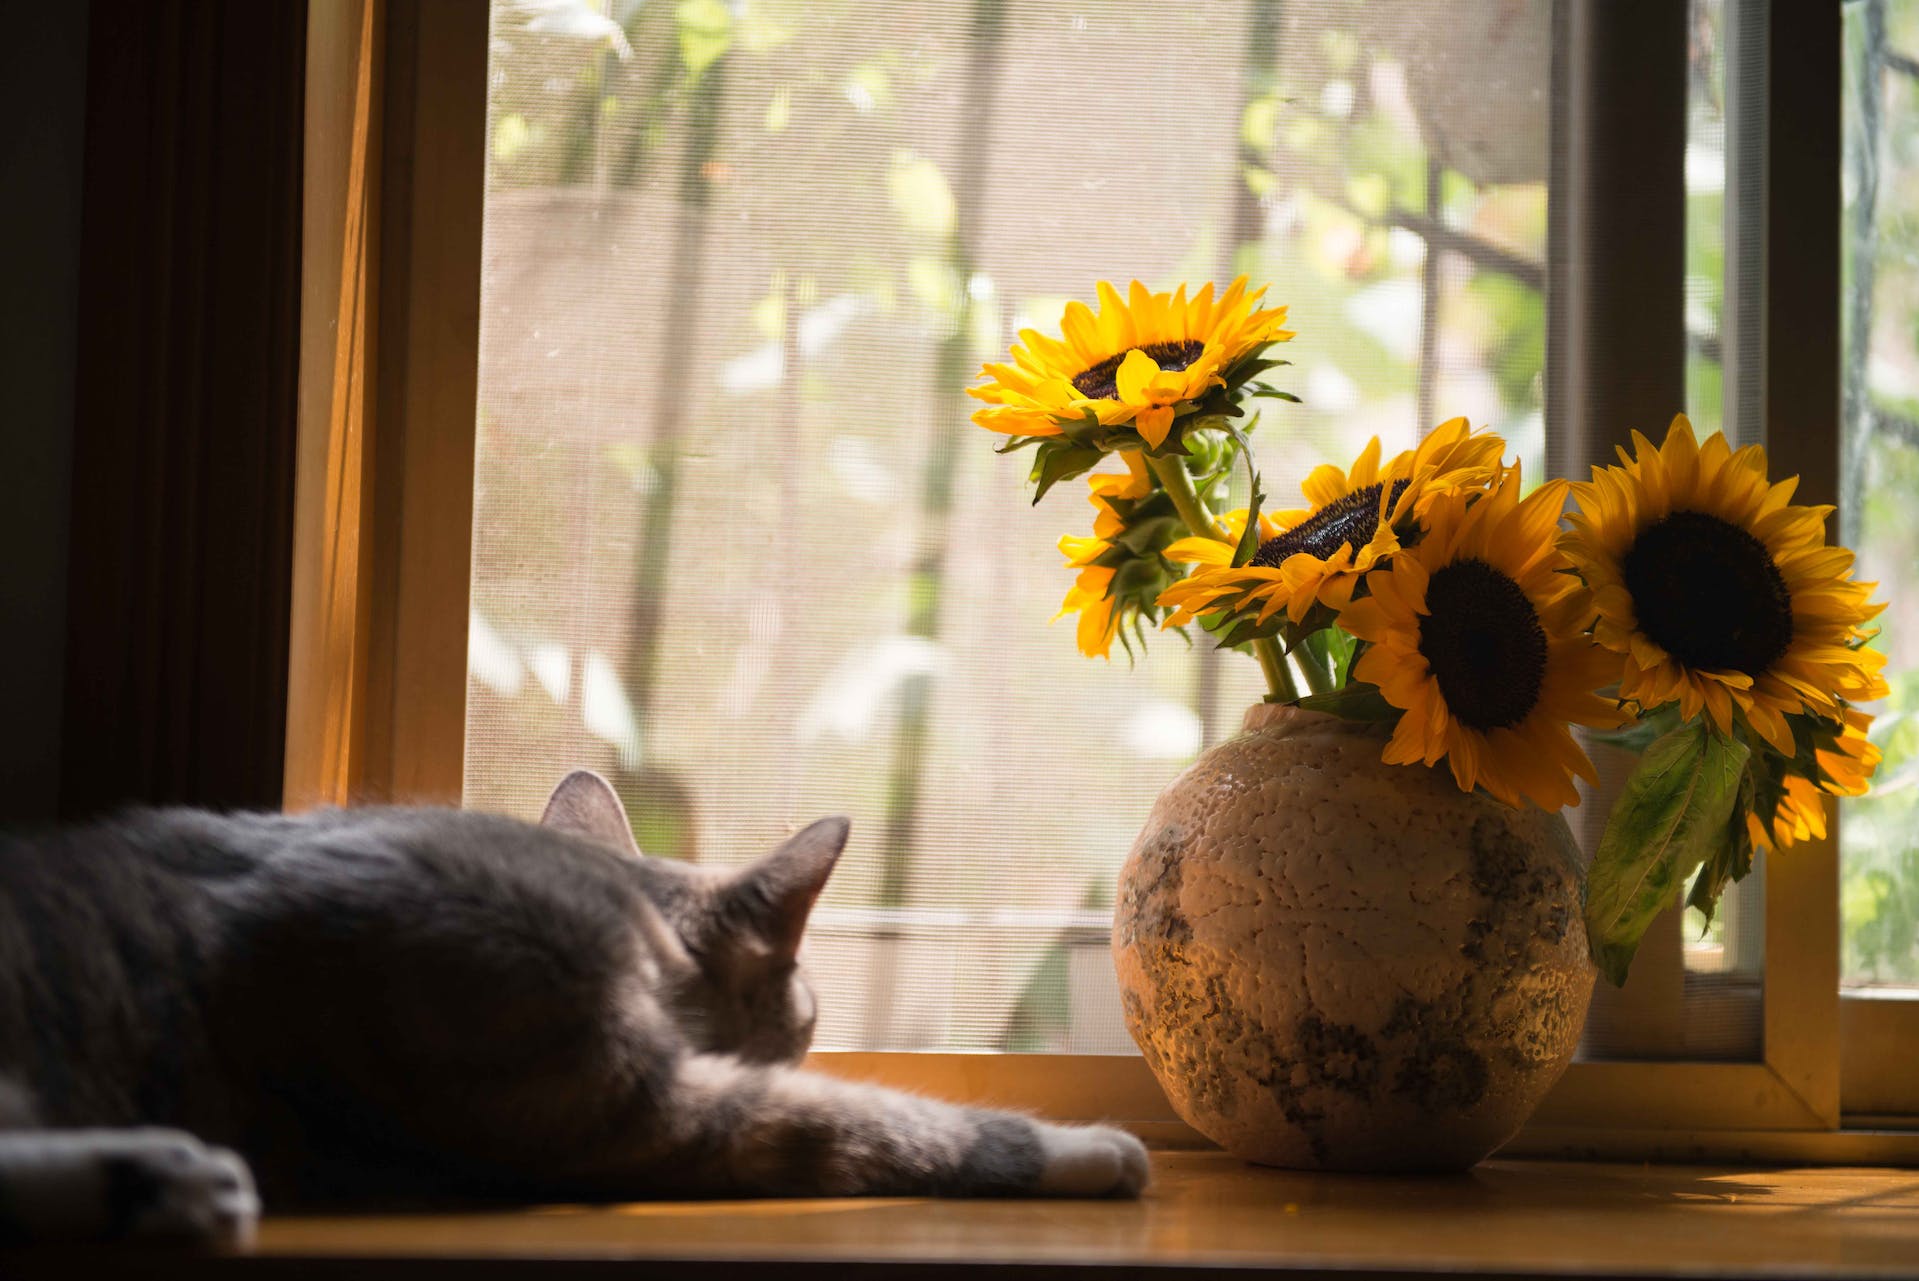 A cat lying on a table indoors next to a vase of sunflowers